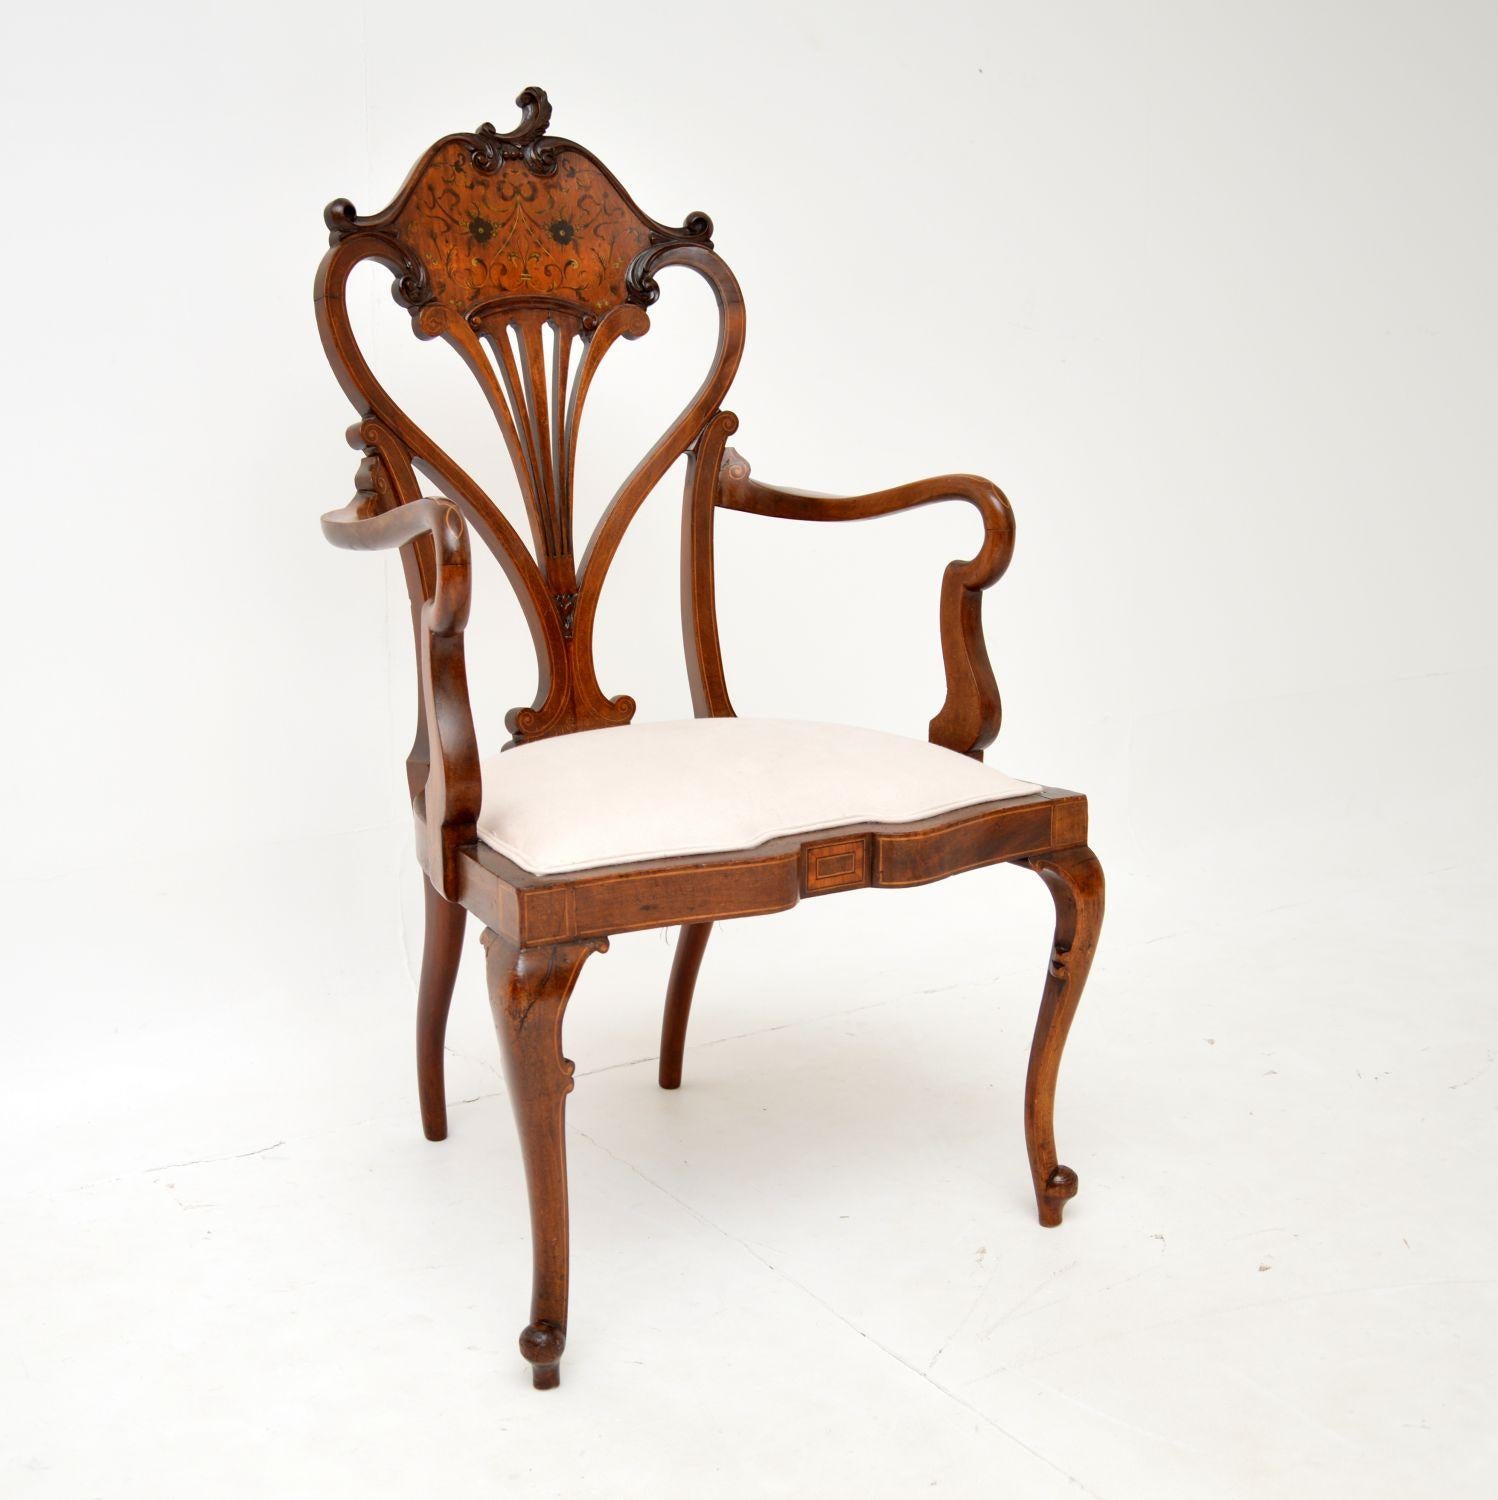 An absolutely stunning antique Art Nouveau armchair. This was made in England, it dates from around the 1890-1900 period.

It is beautifully made and is of great quality. The tulip shaped back is pierced, with fine carving, intricate inlaid